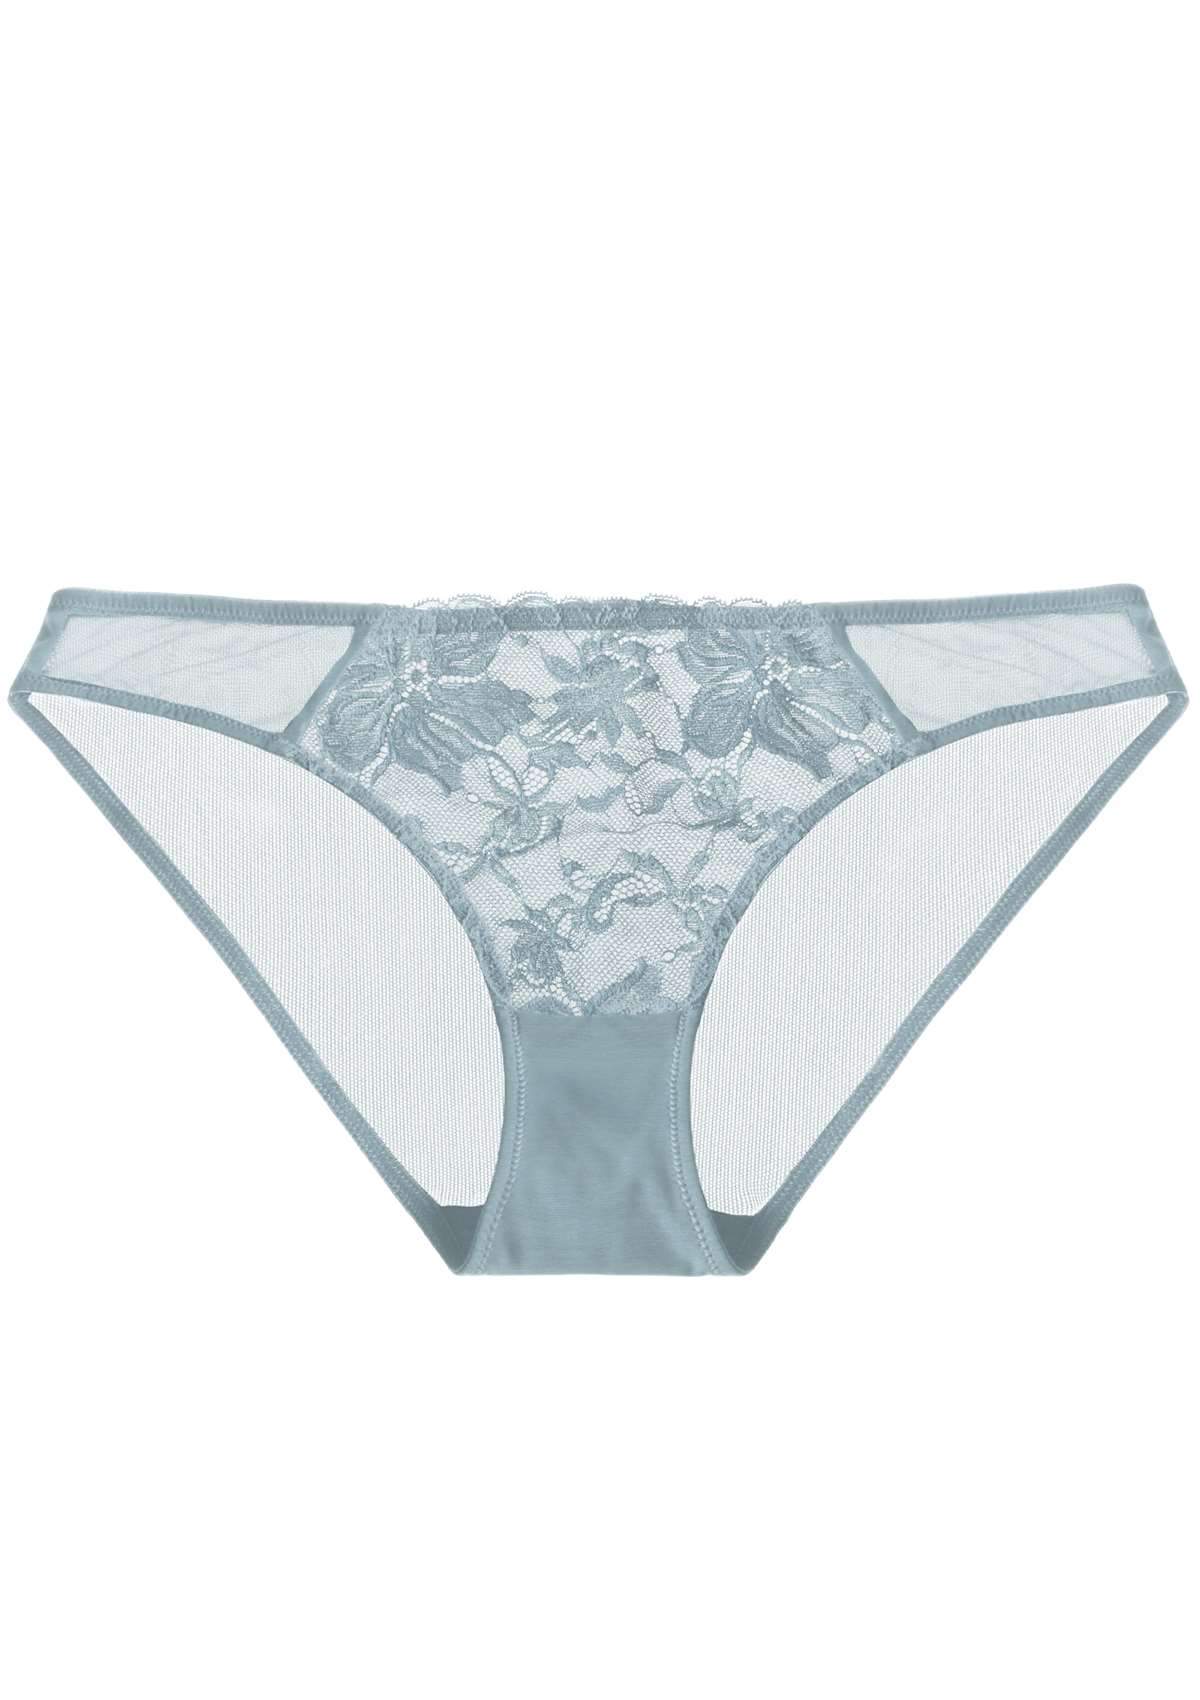 HSIA Pretty In Petals Mid-Rise Floral Lacy Mesh Lightweight Underwear  - M / Pewter Blue